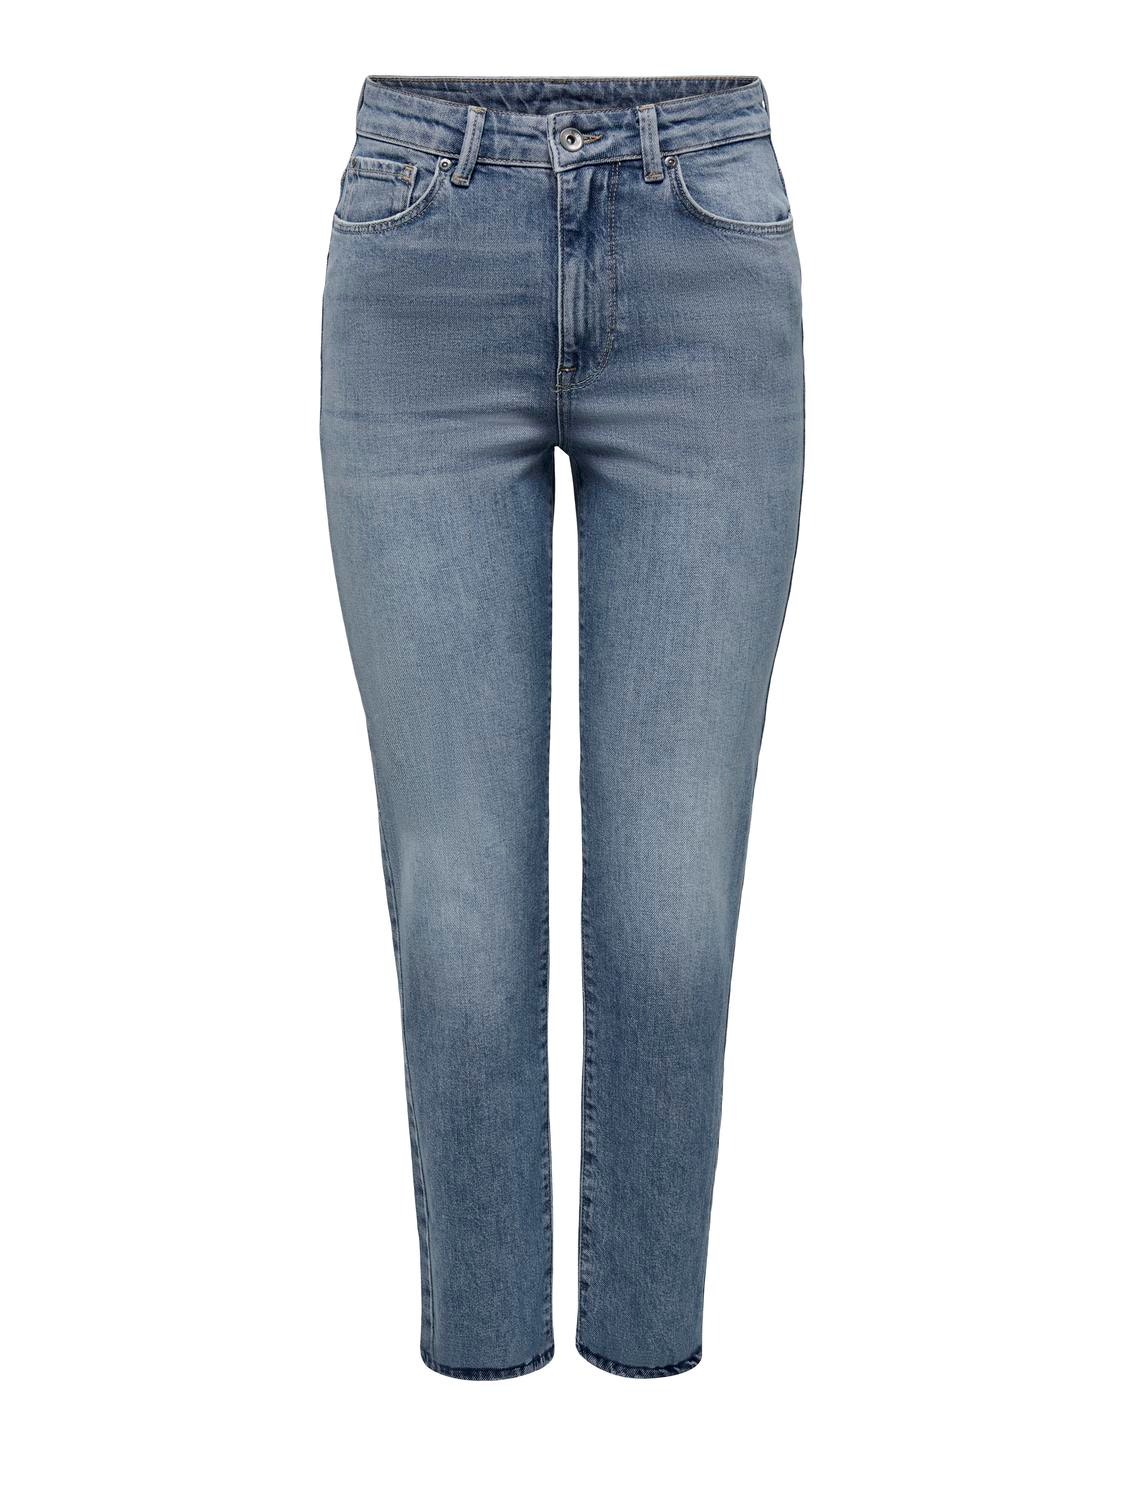 ONLY Gerade geschnitten Hohe Taille Jeans -Special Blue Grey Denim - 15283928